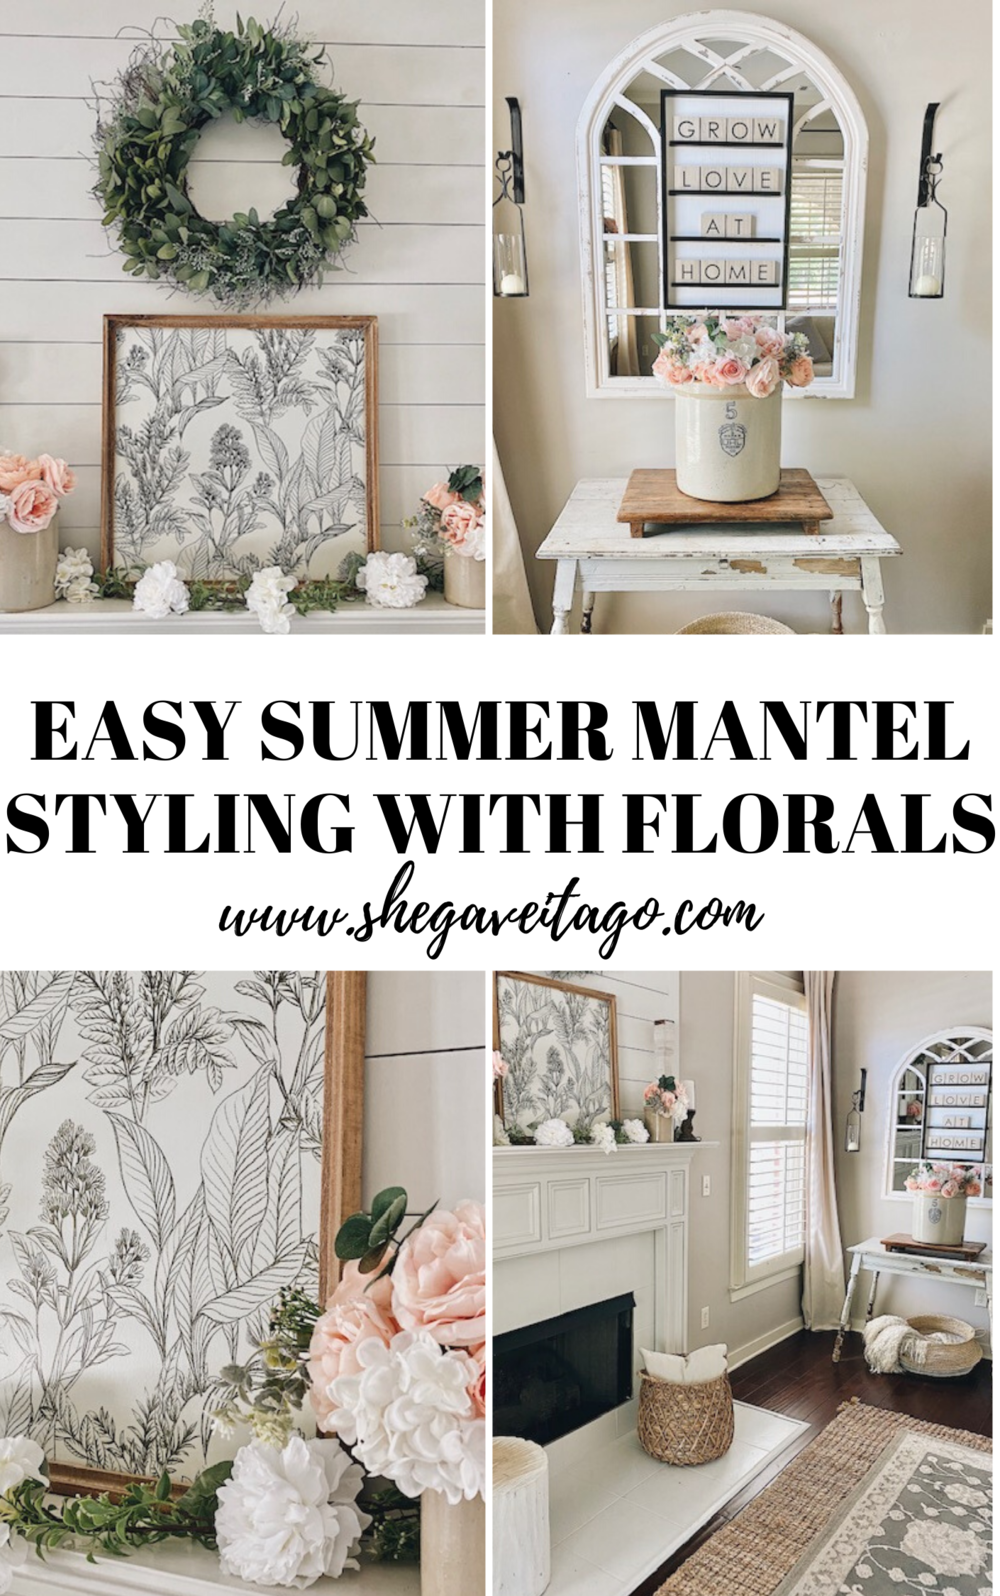 CEasy Summer Mantel Styling With Florals.png